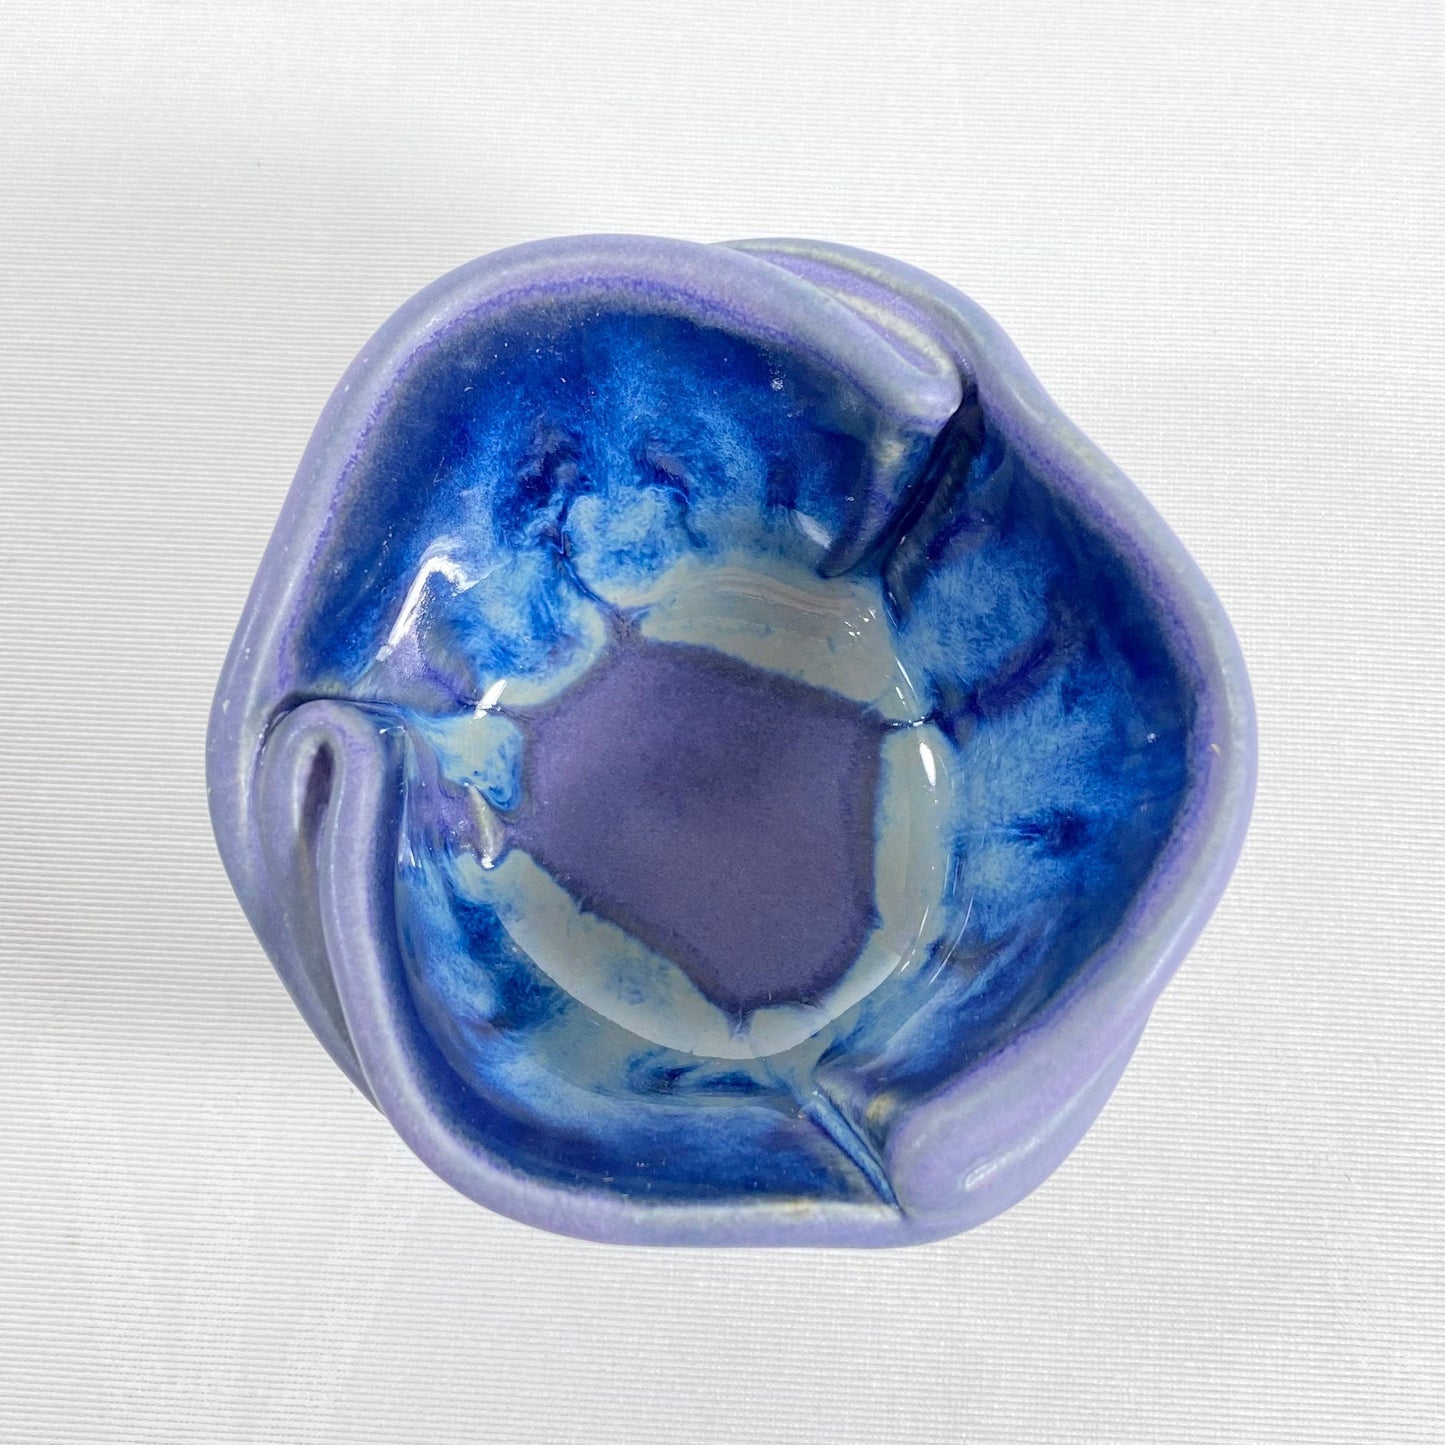 Handmade Purple and Blue Tiny Pot with Serving Spoon, Functional and Decorative Pottery